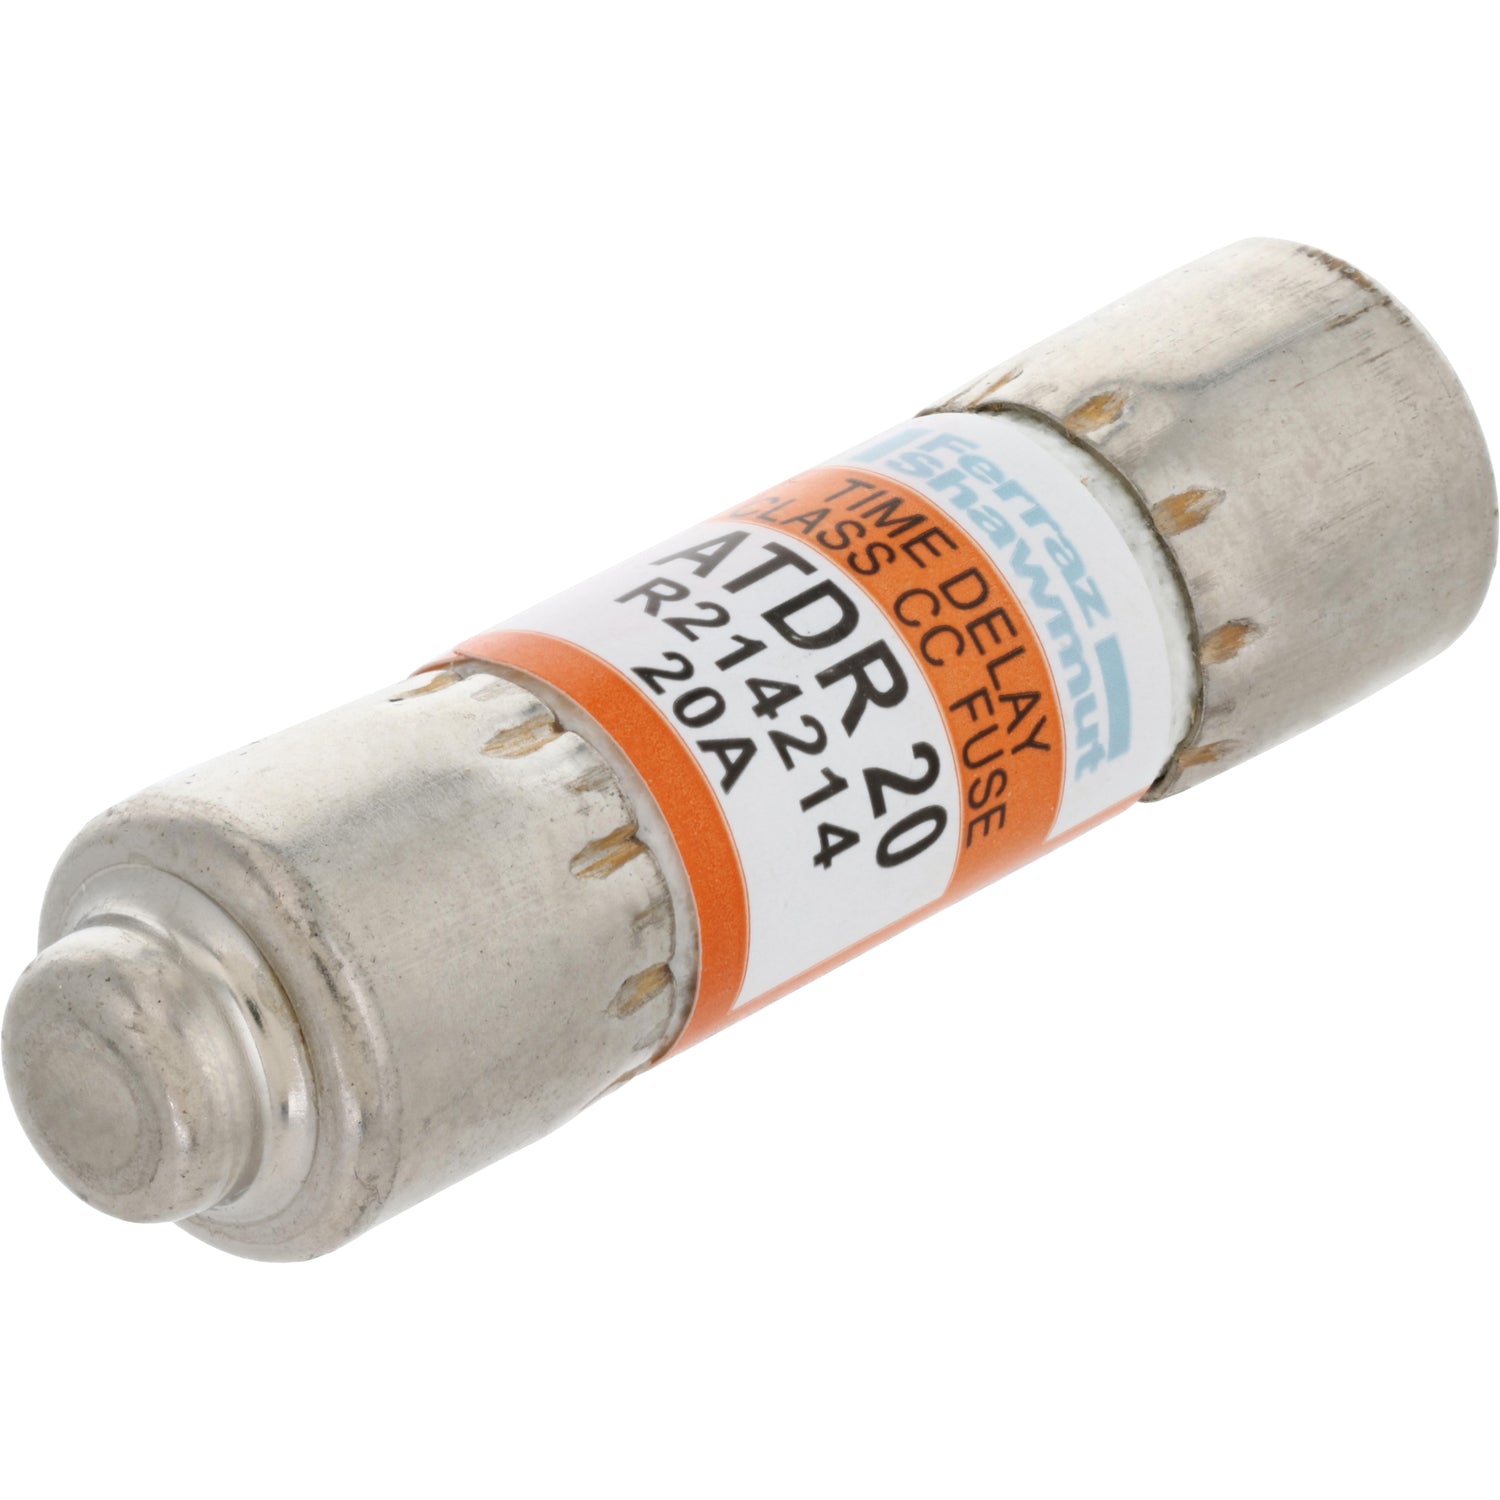 Metal 20 Amp Time-Delay fuse with orange, blue and black label on center. Fuse is on a white background. 